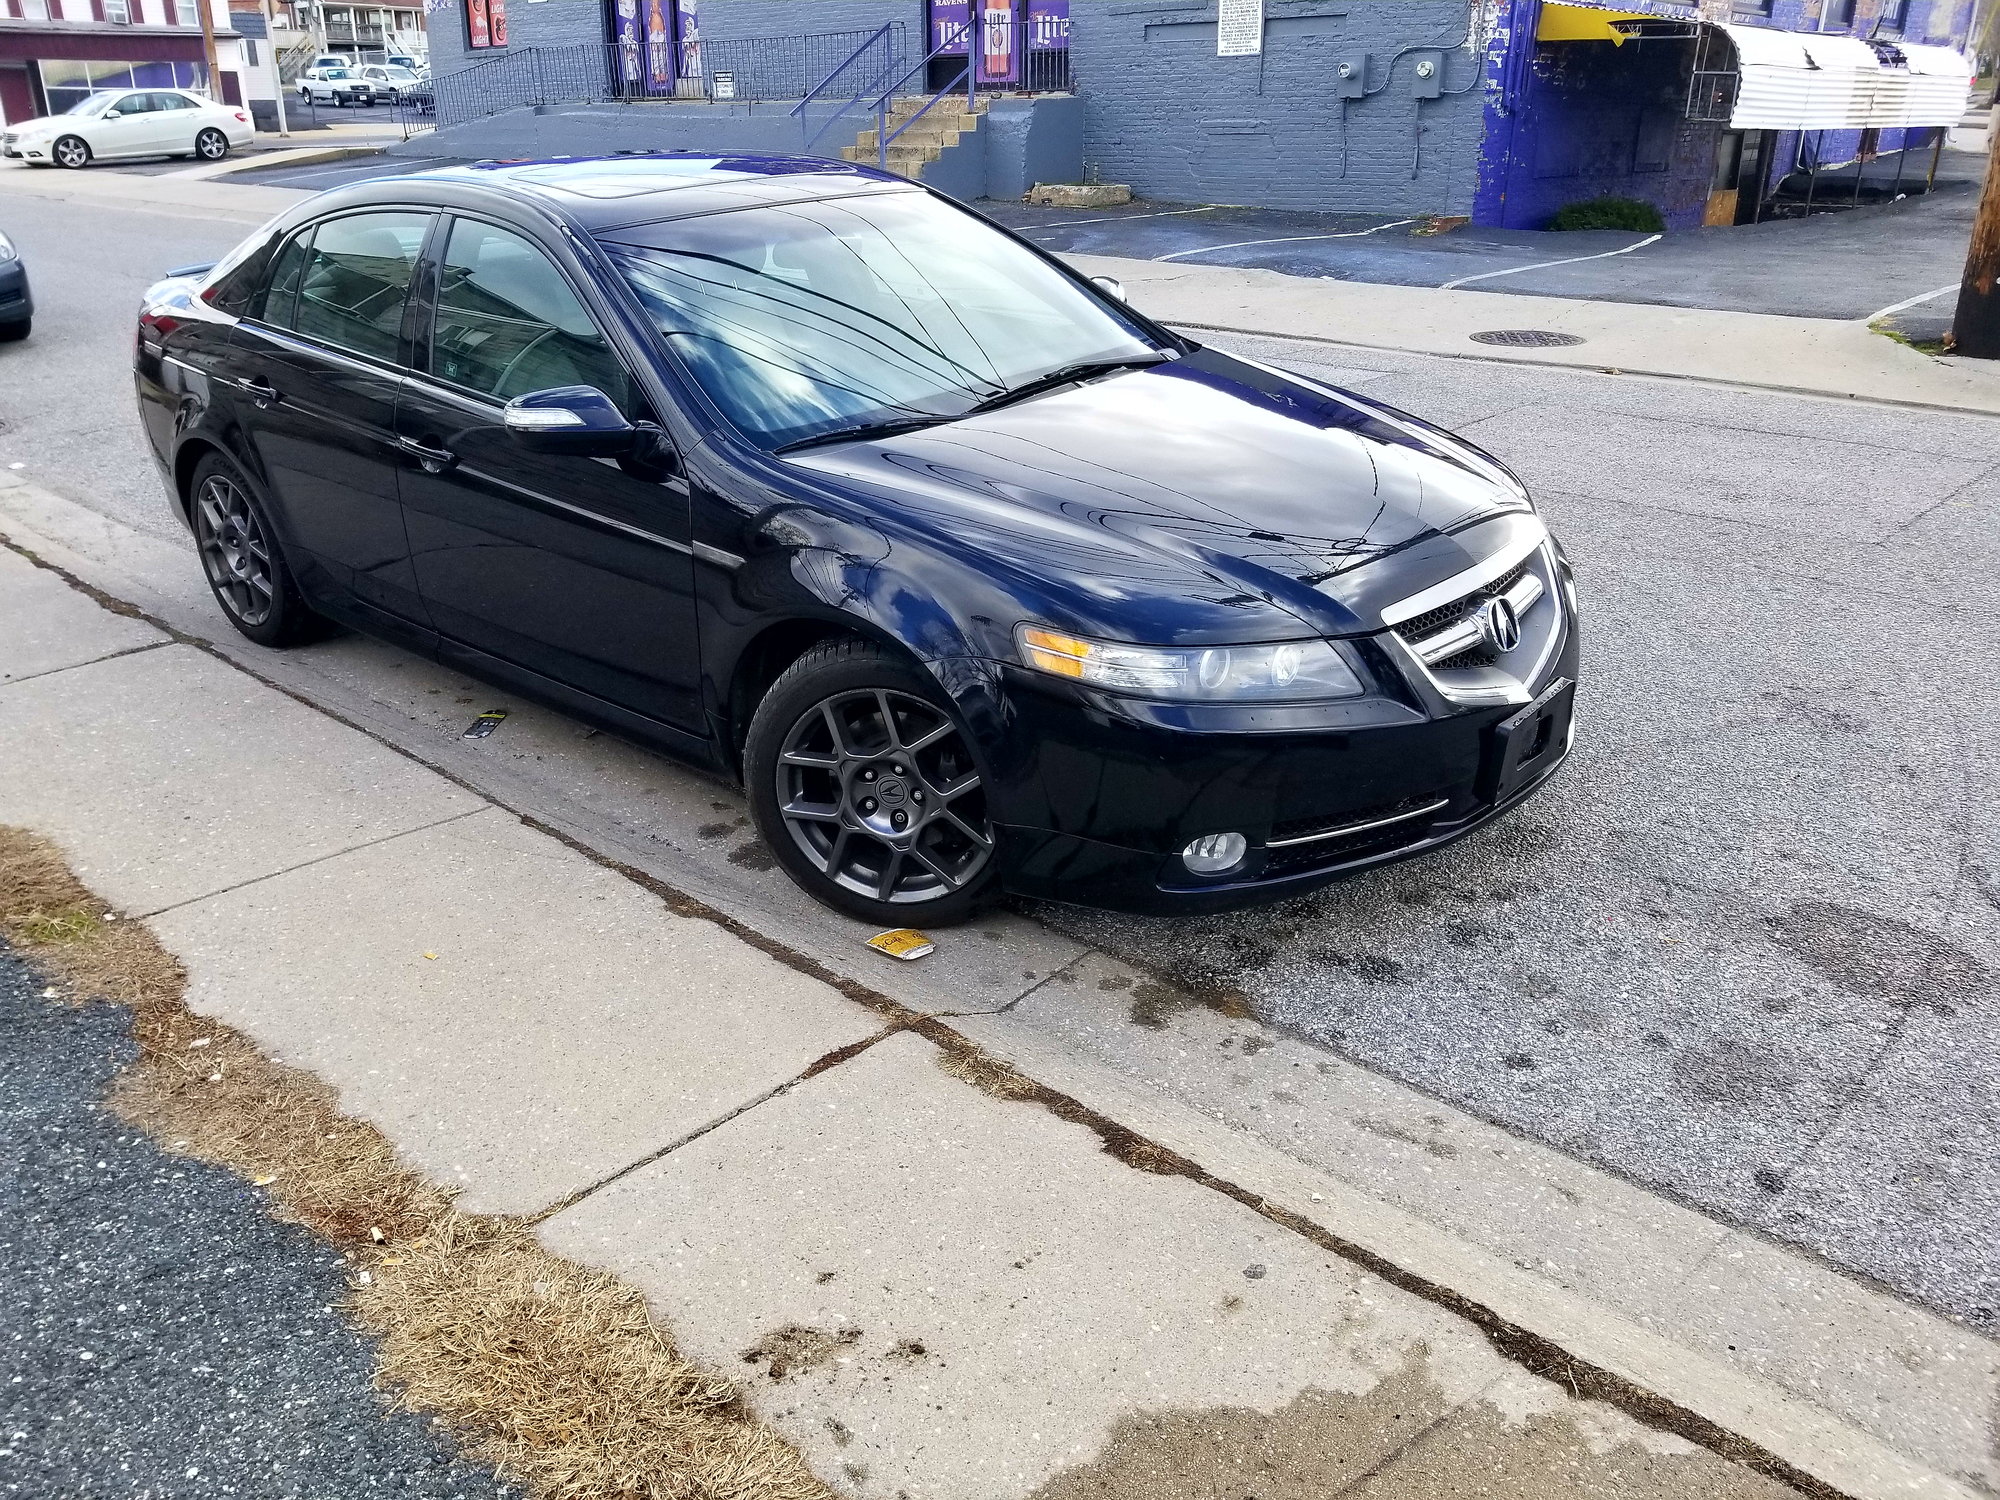 2008 Acura TL - SOLD: 2008 Acura TL Type-S with 6speed Manual Transmission - Used - VIN 19UUA756X8A042235 - 203,000 Miles - 6 cyl - 2WD - Manual - Sedan - Black - Baltimore, MD 21230, United States